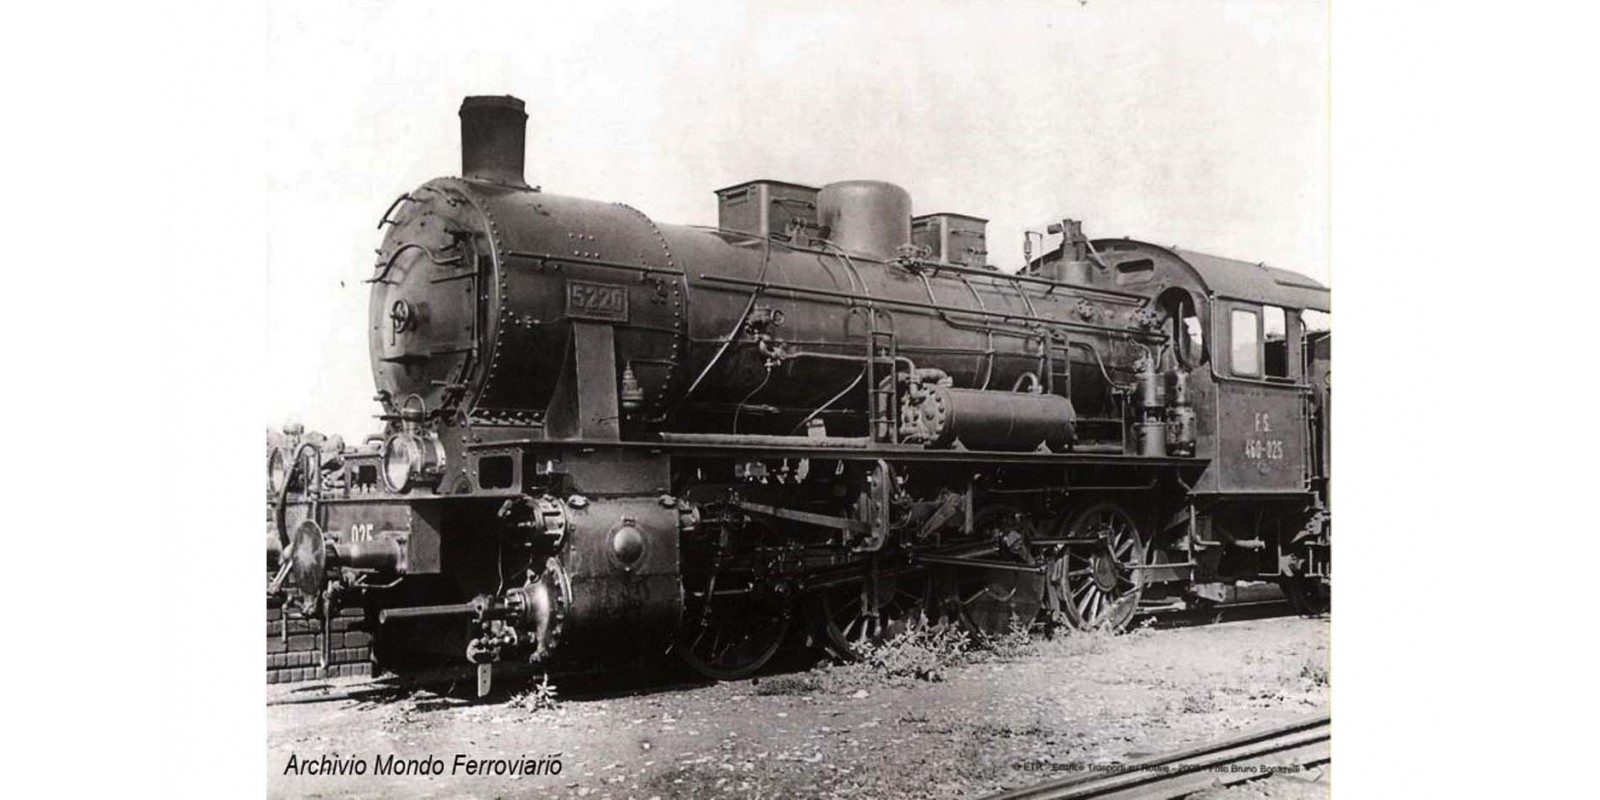 RI2811 FS, (GR.460) 3-dome symetrical boiler, black livery, period III with original numbers painted in white on the cabin 